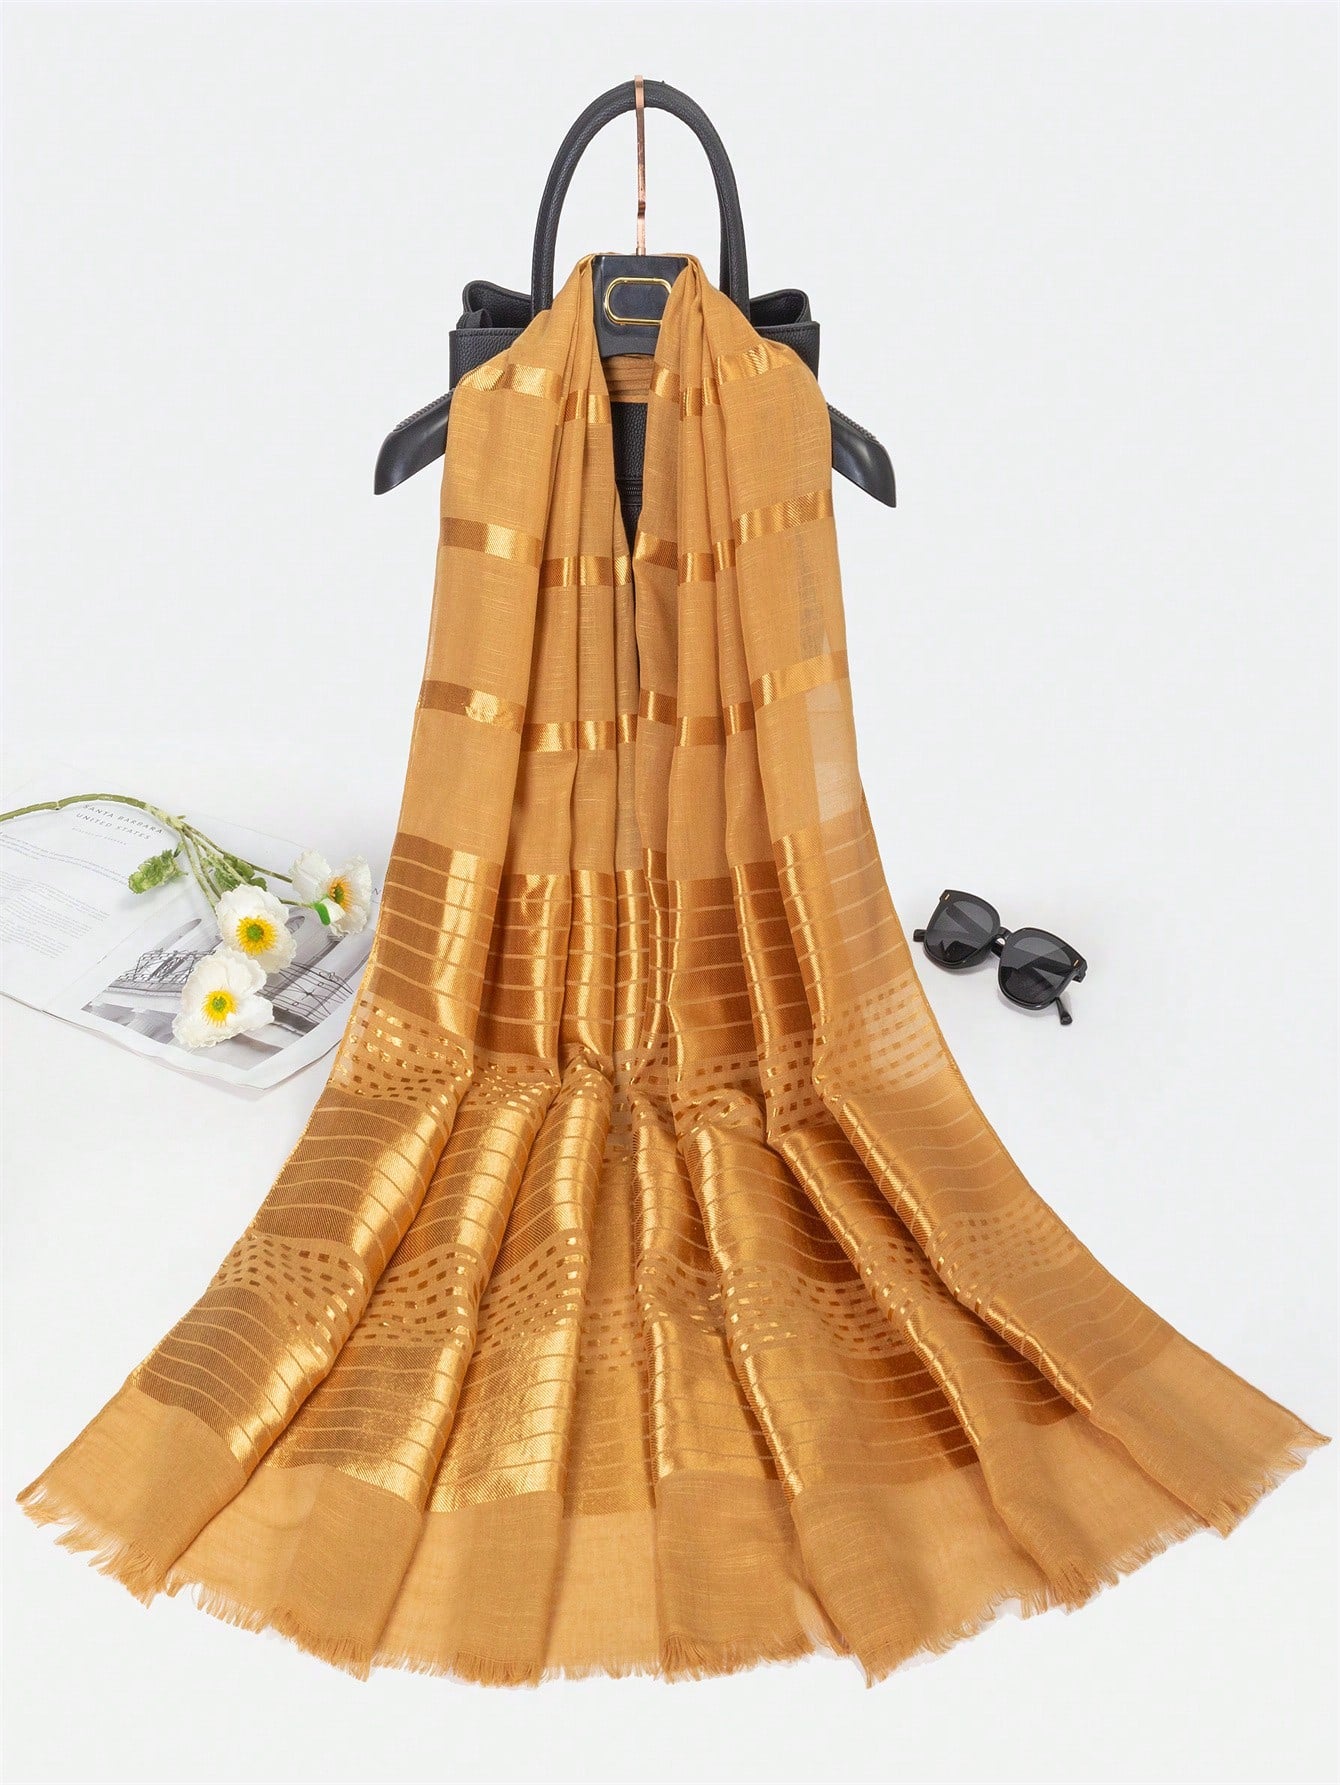 New Women's Polyester Scarf With Glitter And Short Fringe, Fashionable And Casual Solid Color Shawl